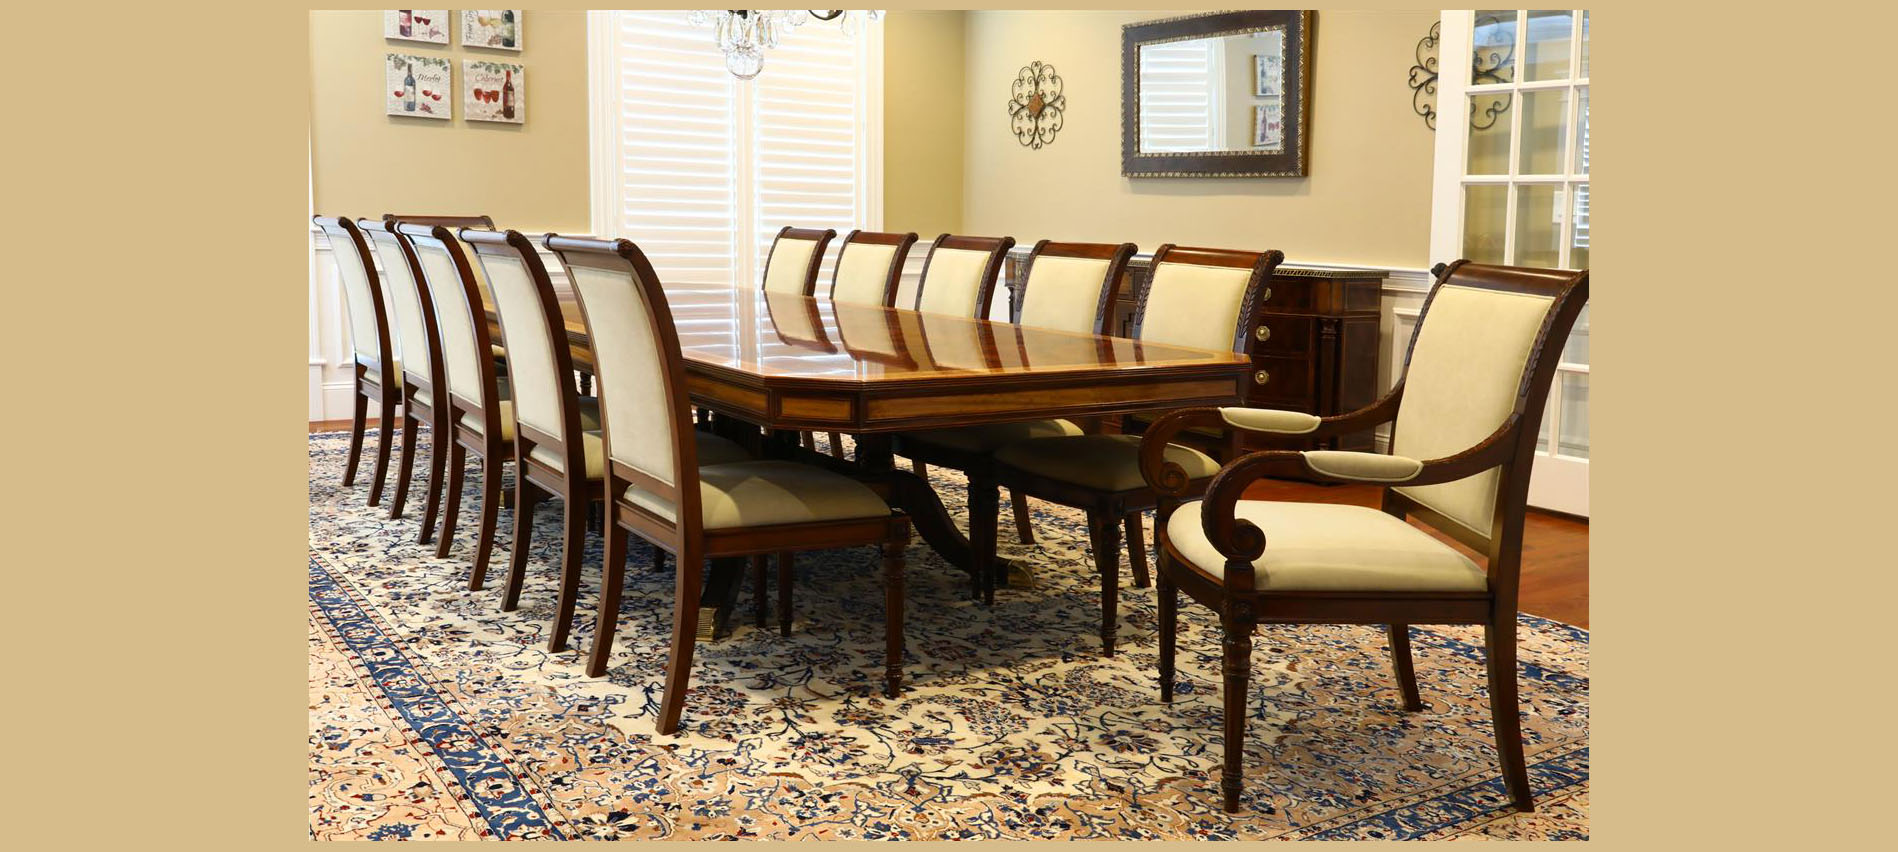 extendable dining table seats 12